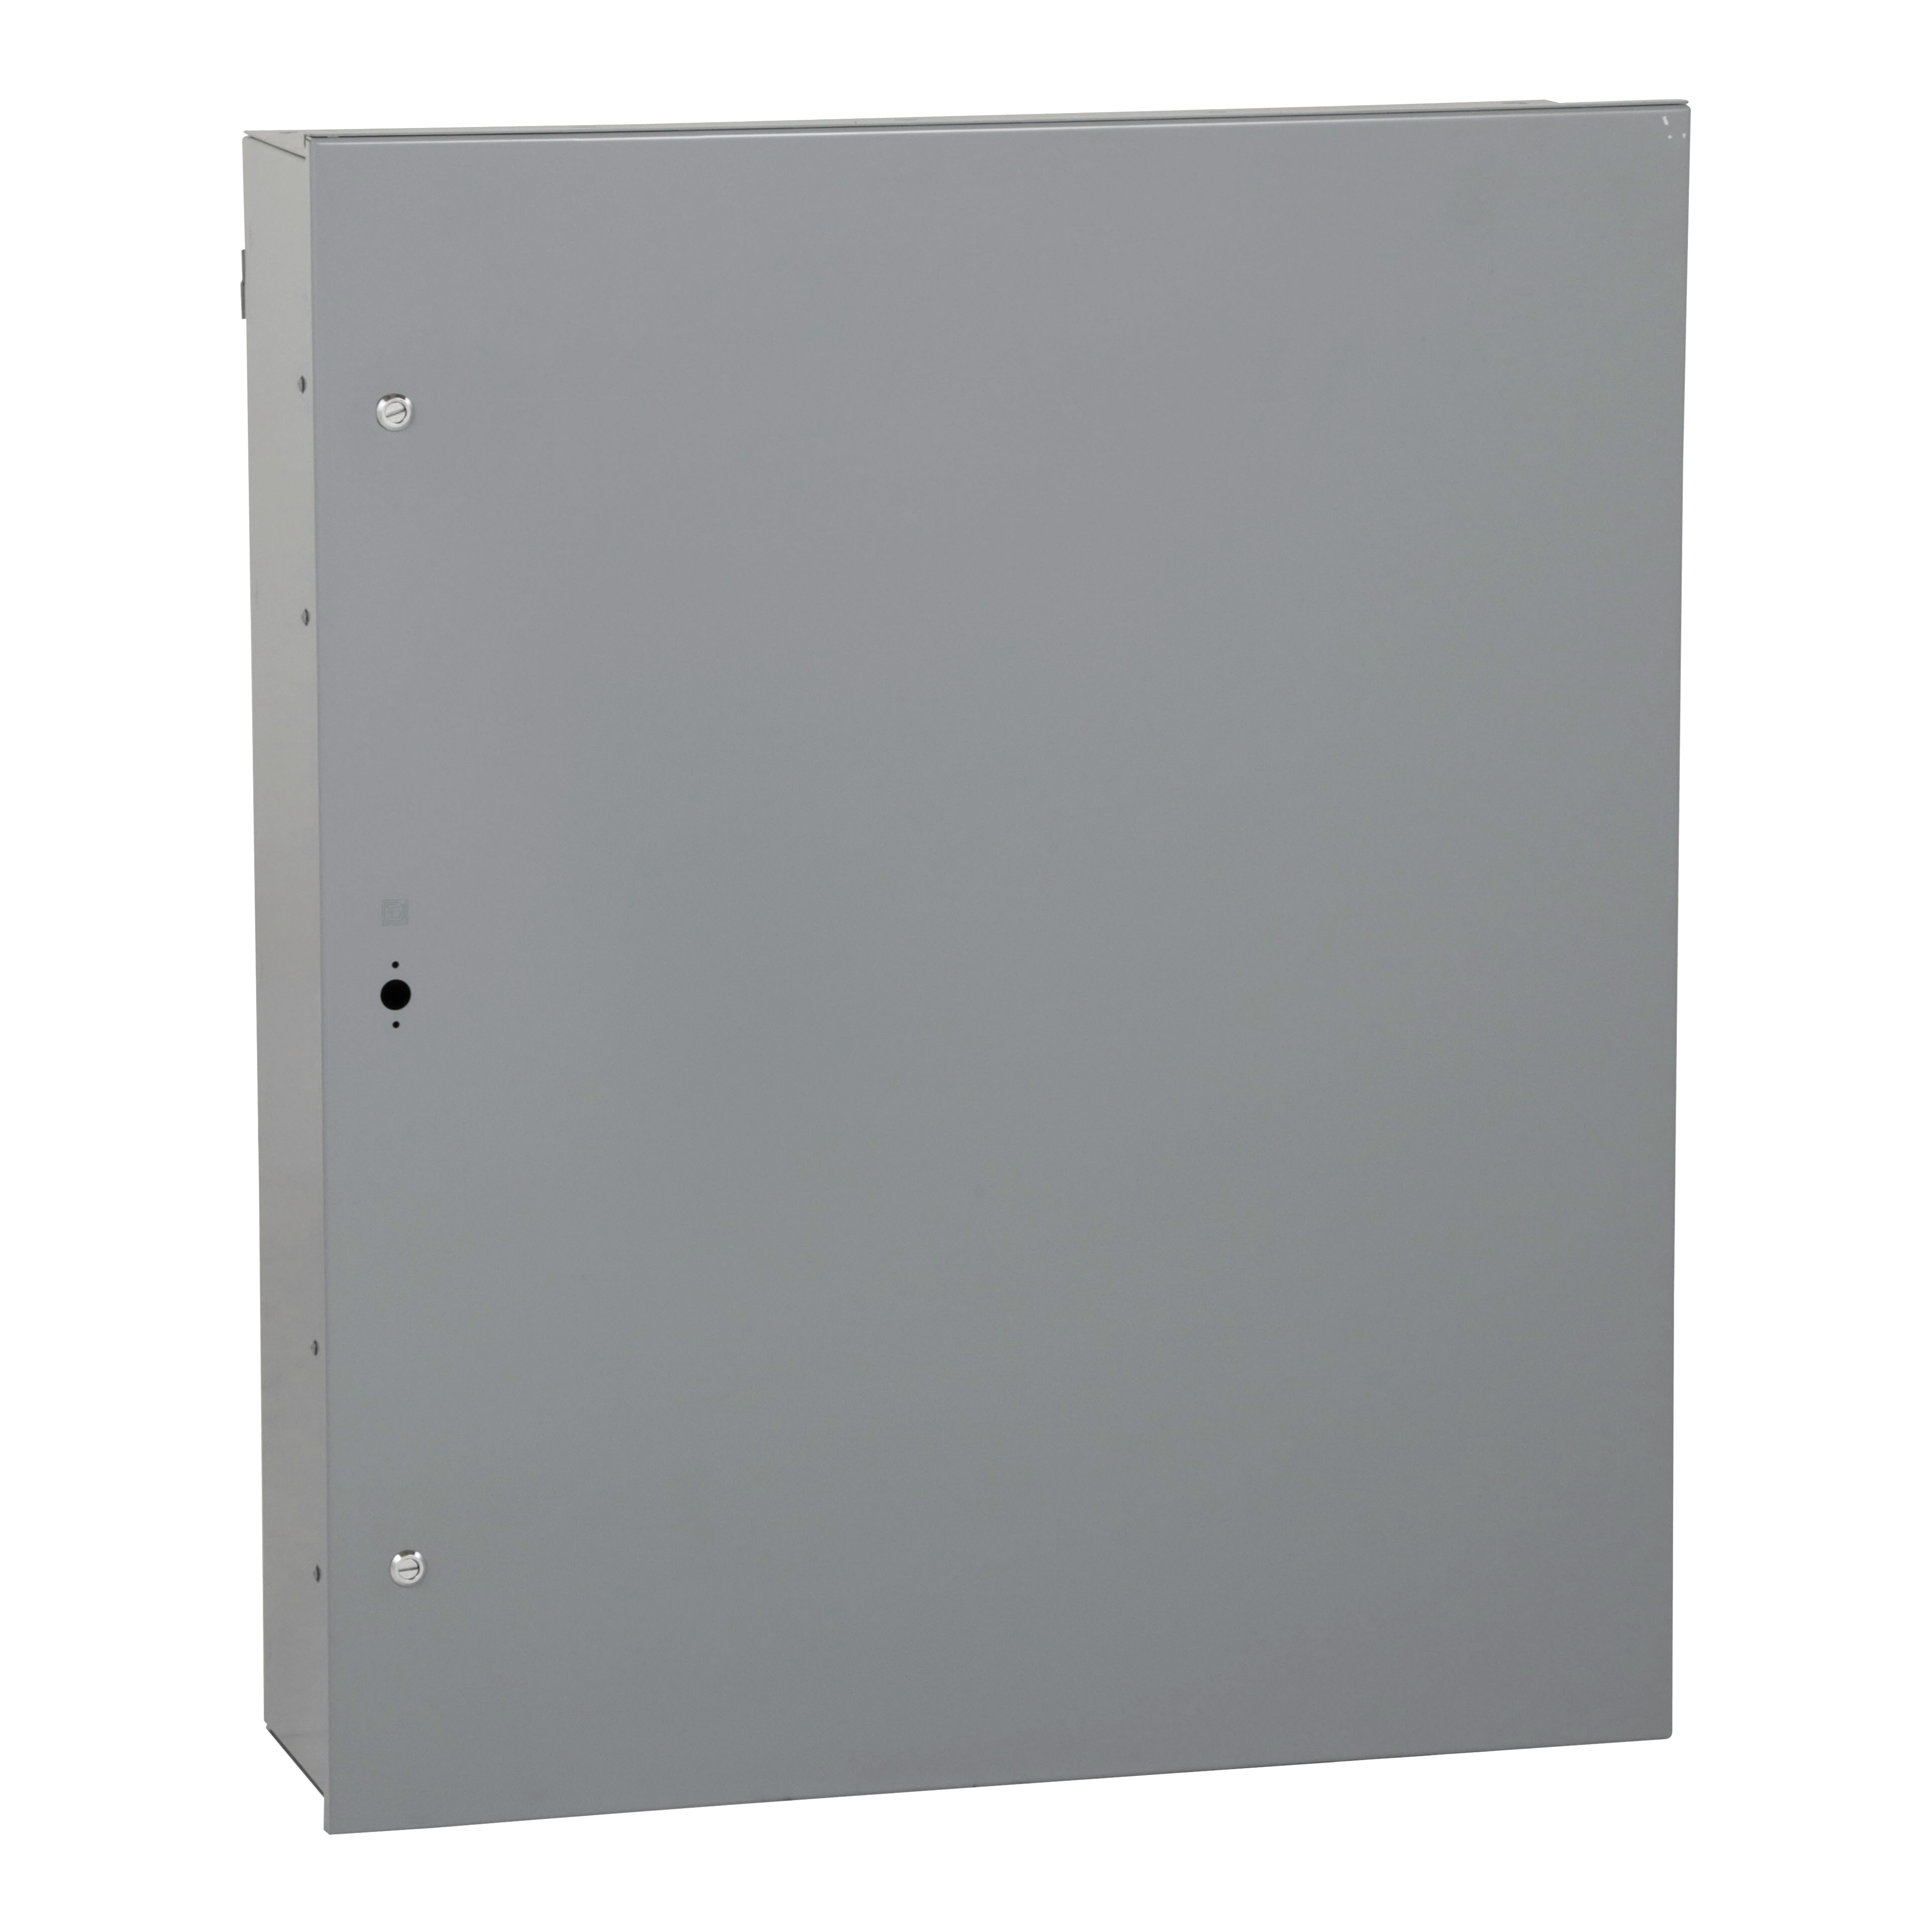 Box, I-Line Panelboard, HCJ, 32in W x 48in H x 9.5in D, Type 3R/5/12, w/front